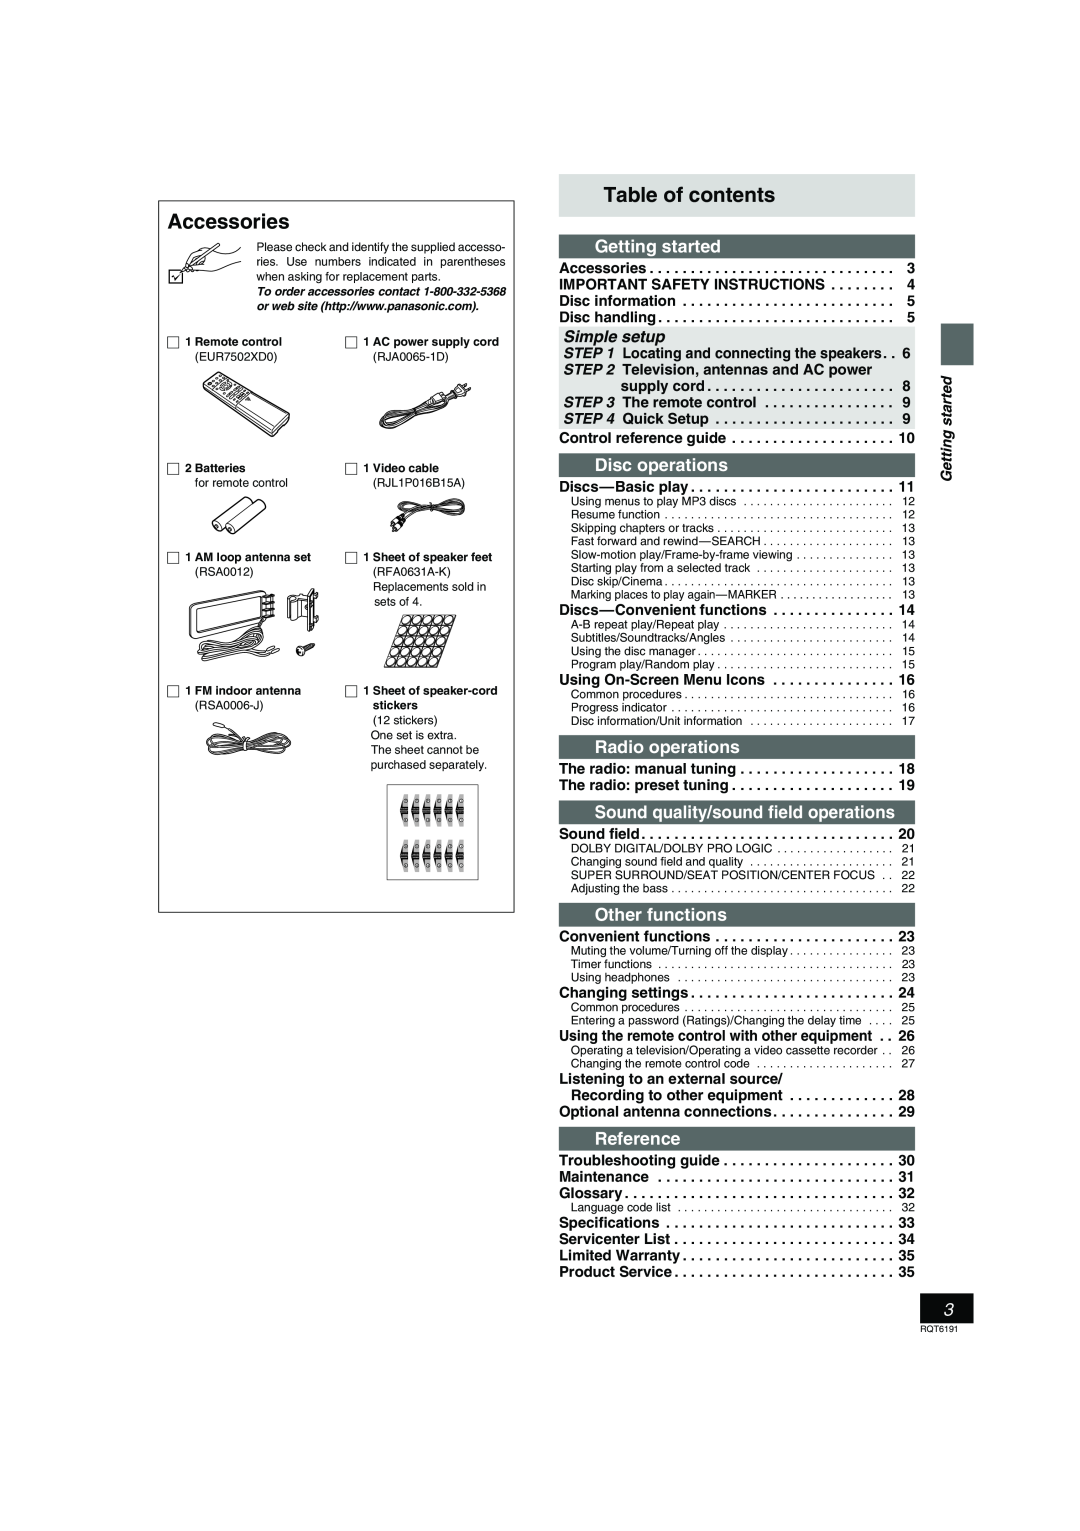 Panasonic SC-HT67 Accessories, Table of contents, Getting started, Disc operations, Radio operations, Other functions 